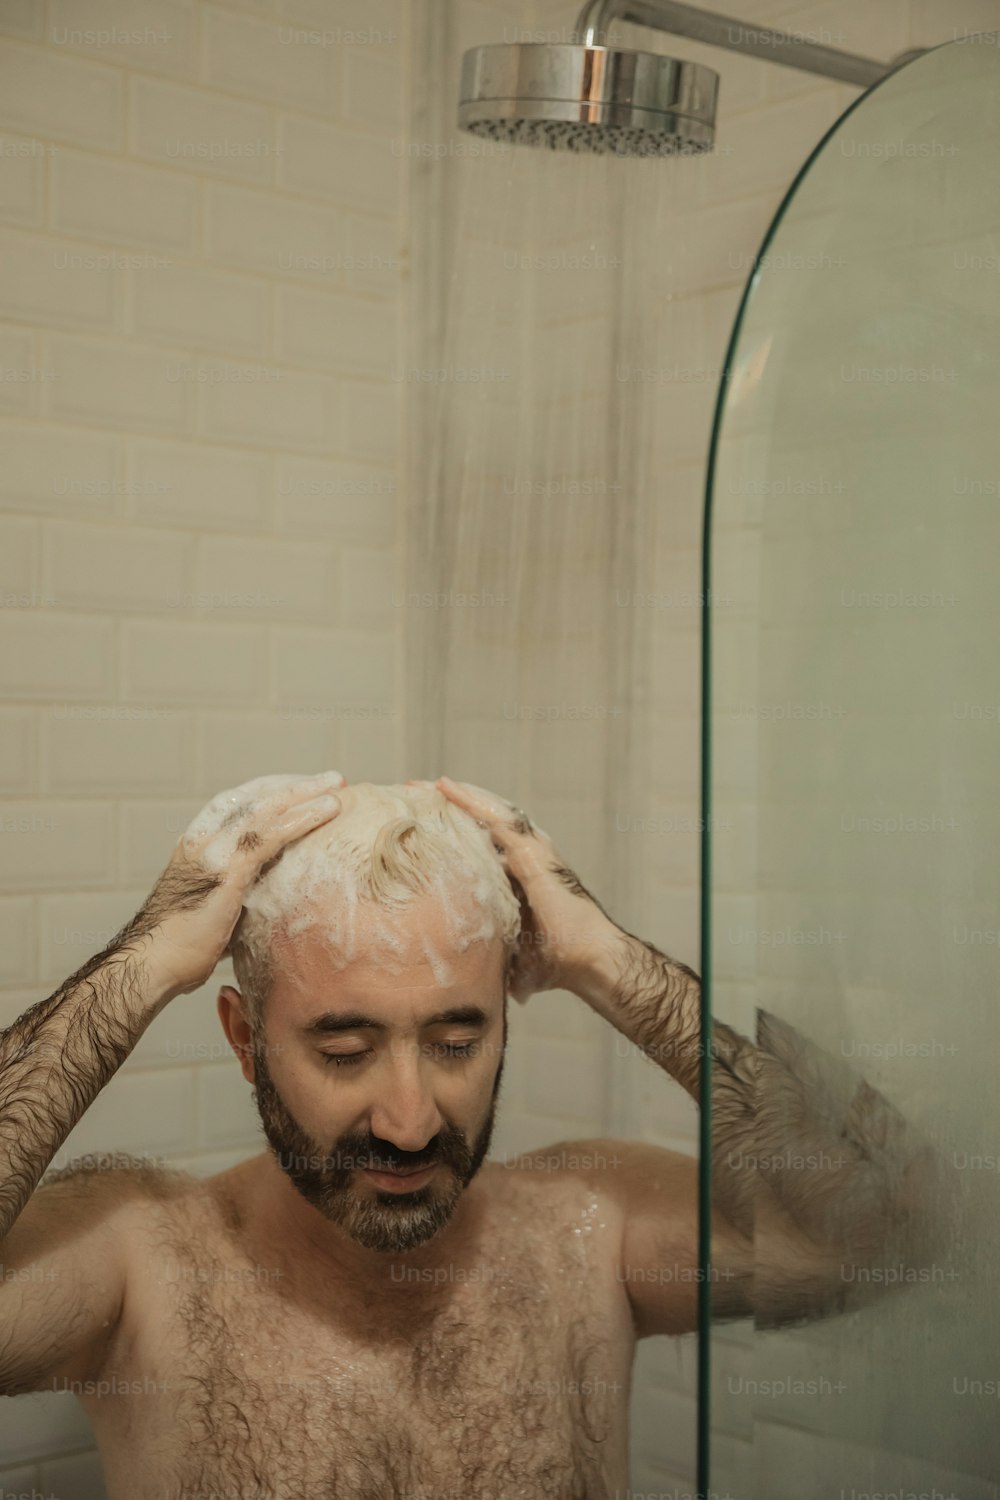 a shirtless man with a beard is in the shower